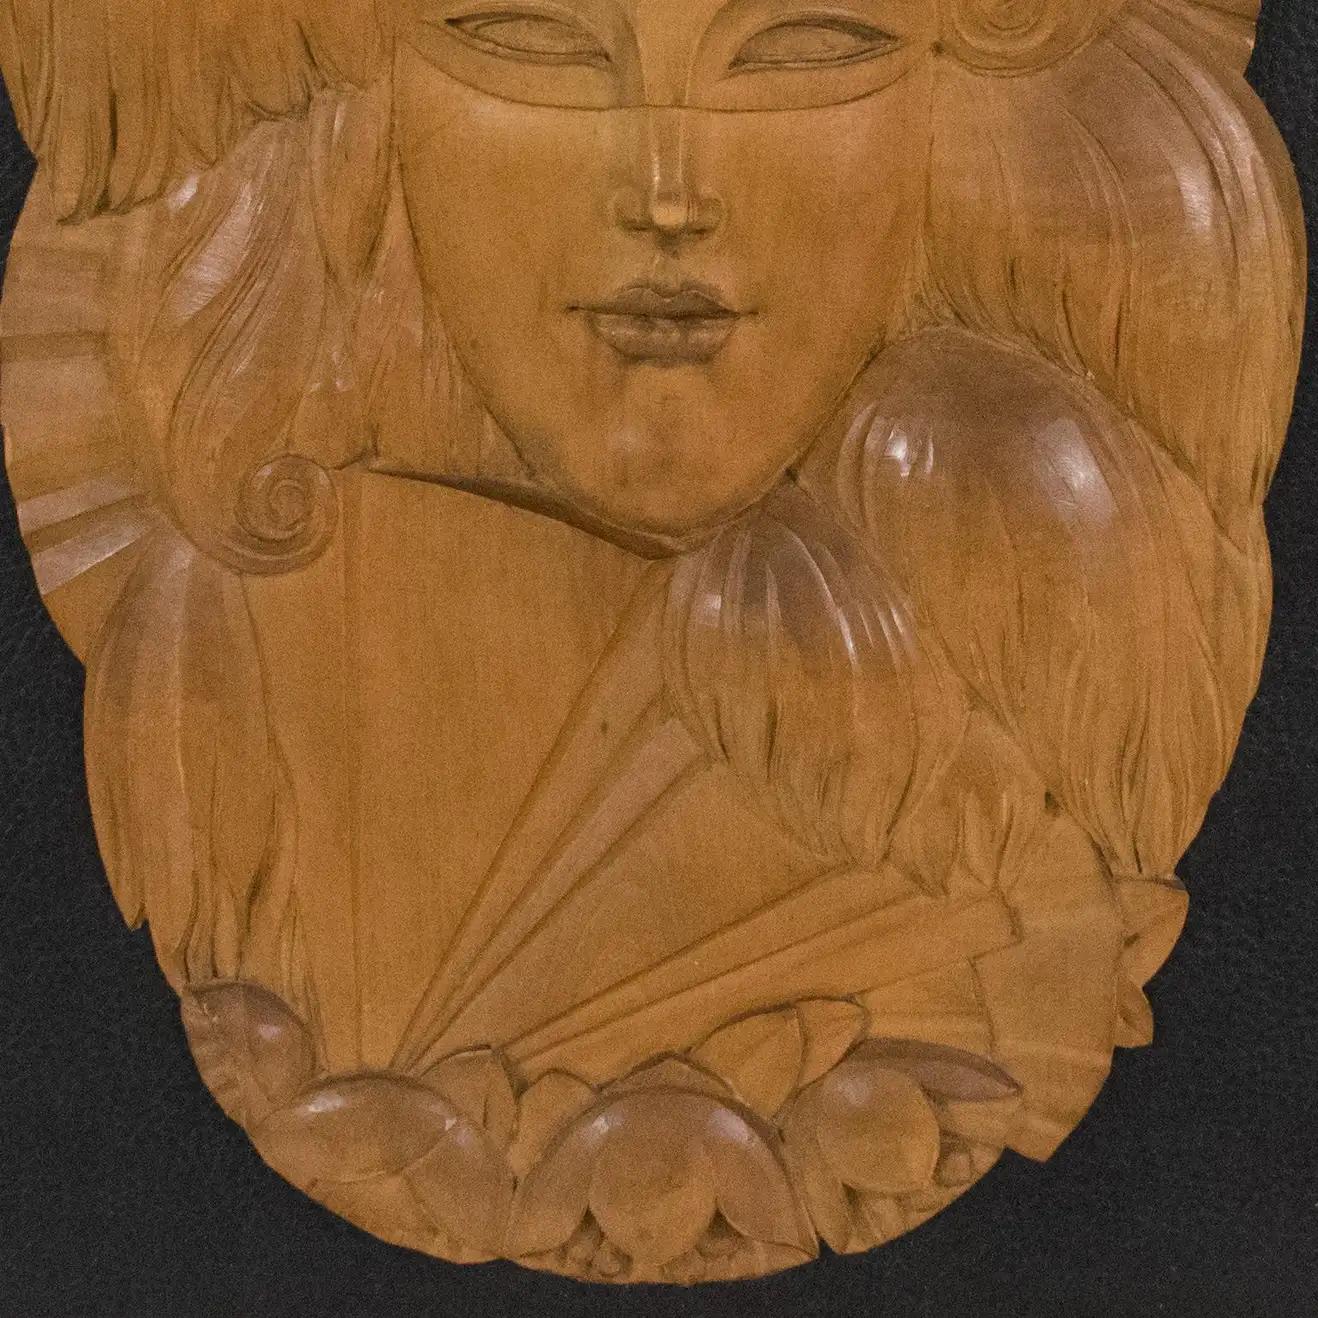 Art Deco Handcrafted Wood Panel Wall Sculpture Venetian Mask, 1930s For Sale 6